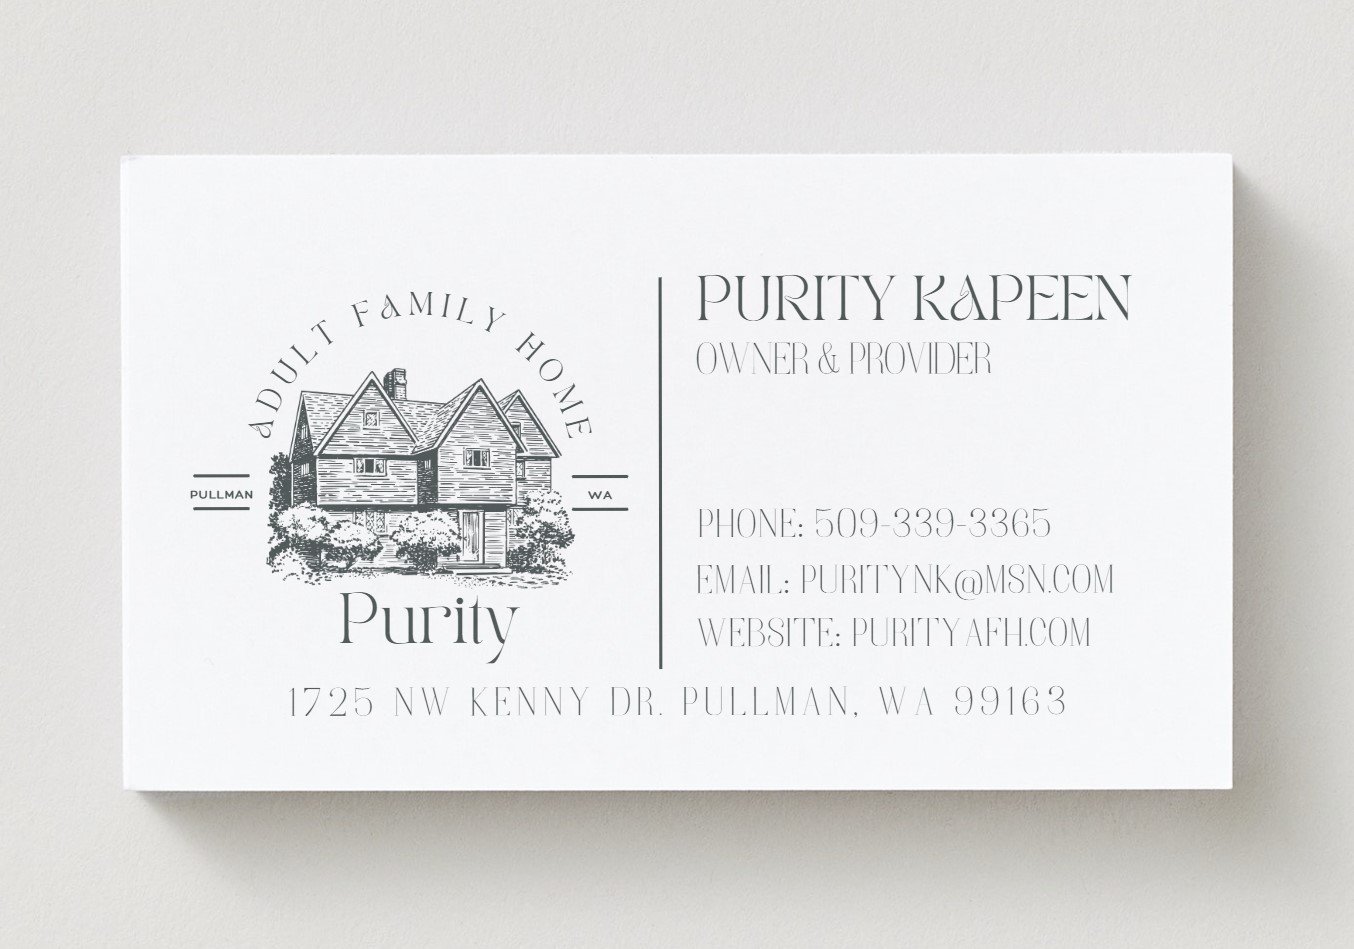 22110701 - Purity AFH Business Cards - Pullman - Back.jpg